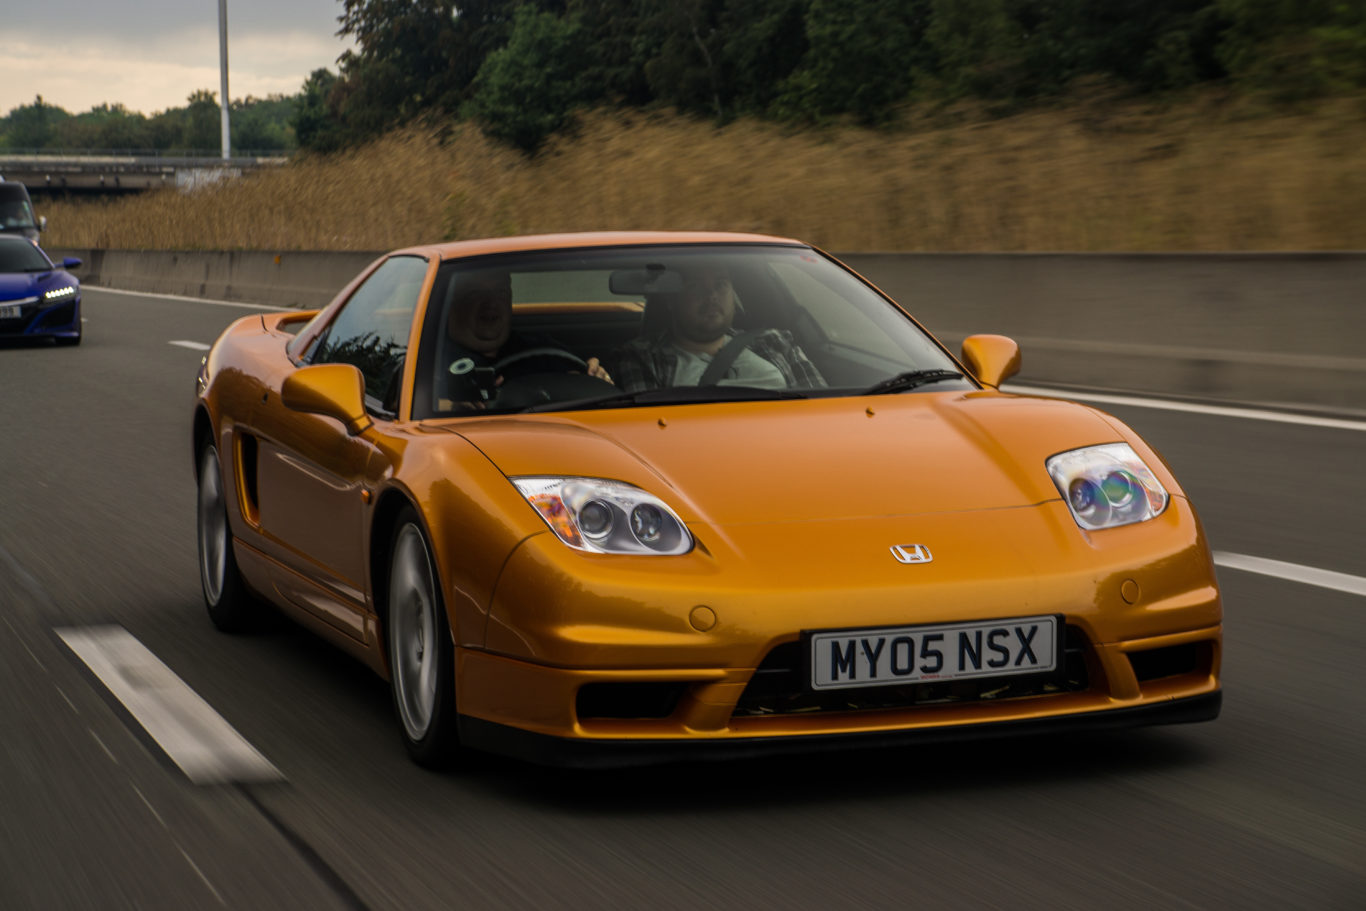 The older NSX was surprisingly refined on the motorway